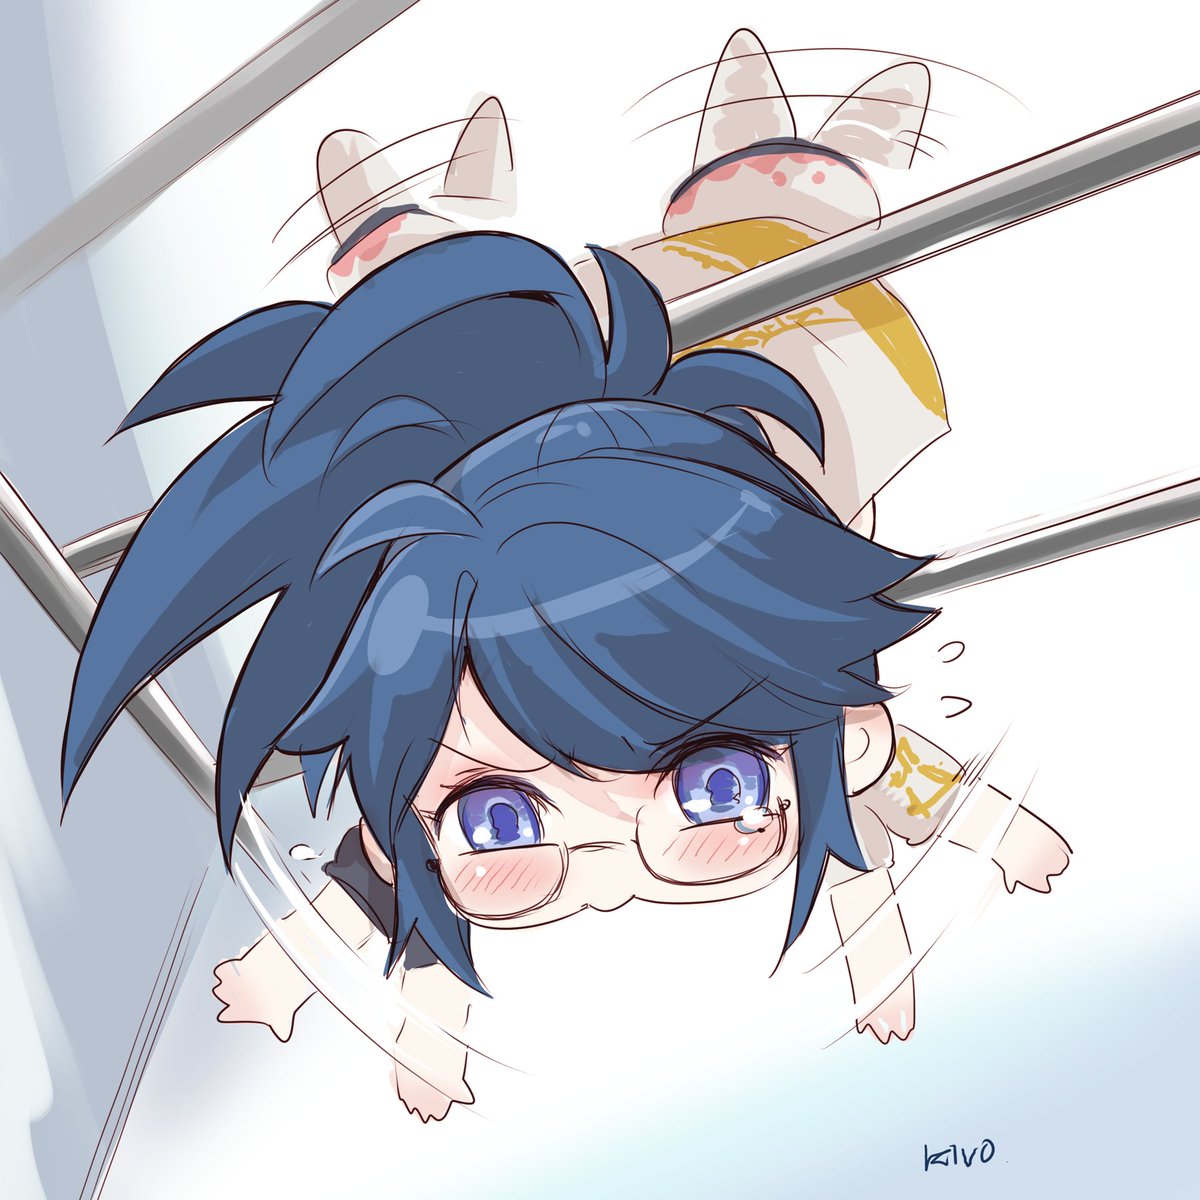 「Souchou plush wants to come home to you.」|kivoのイラスト